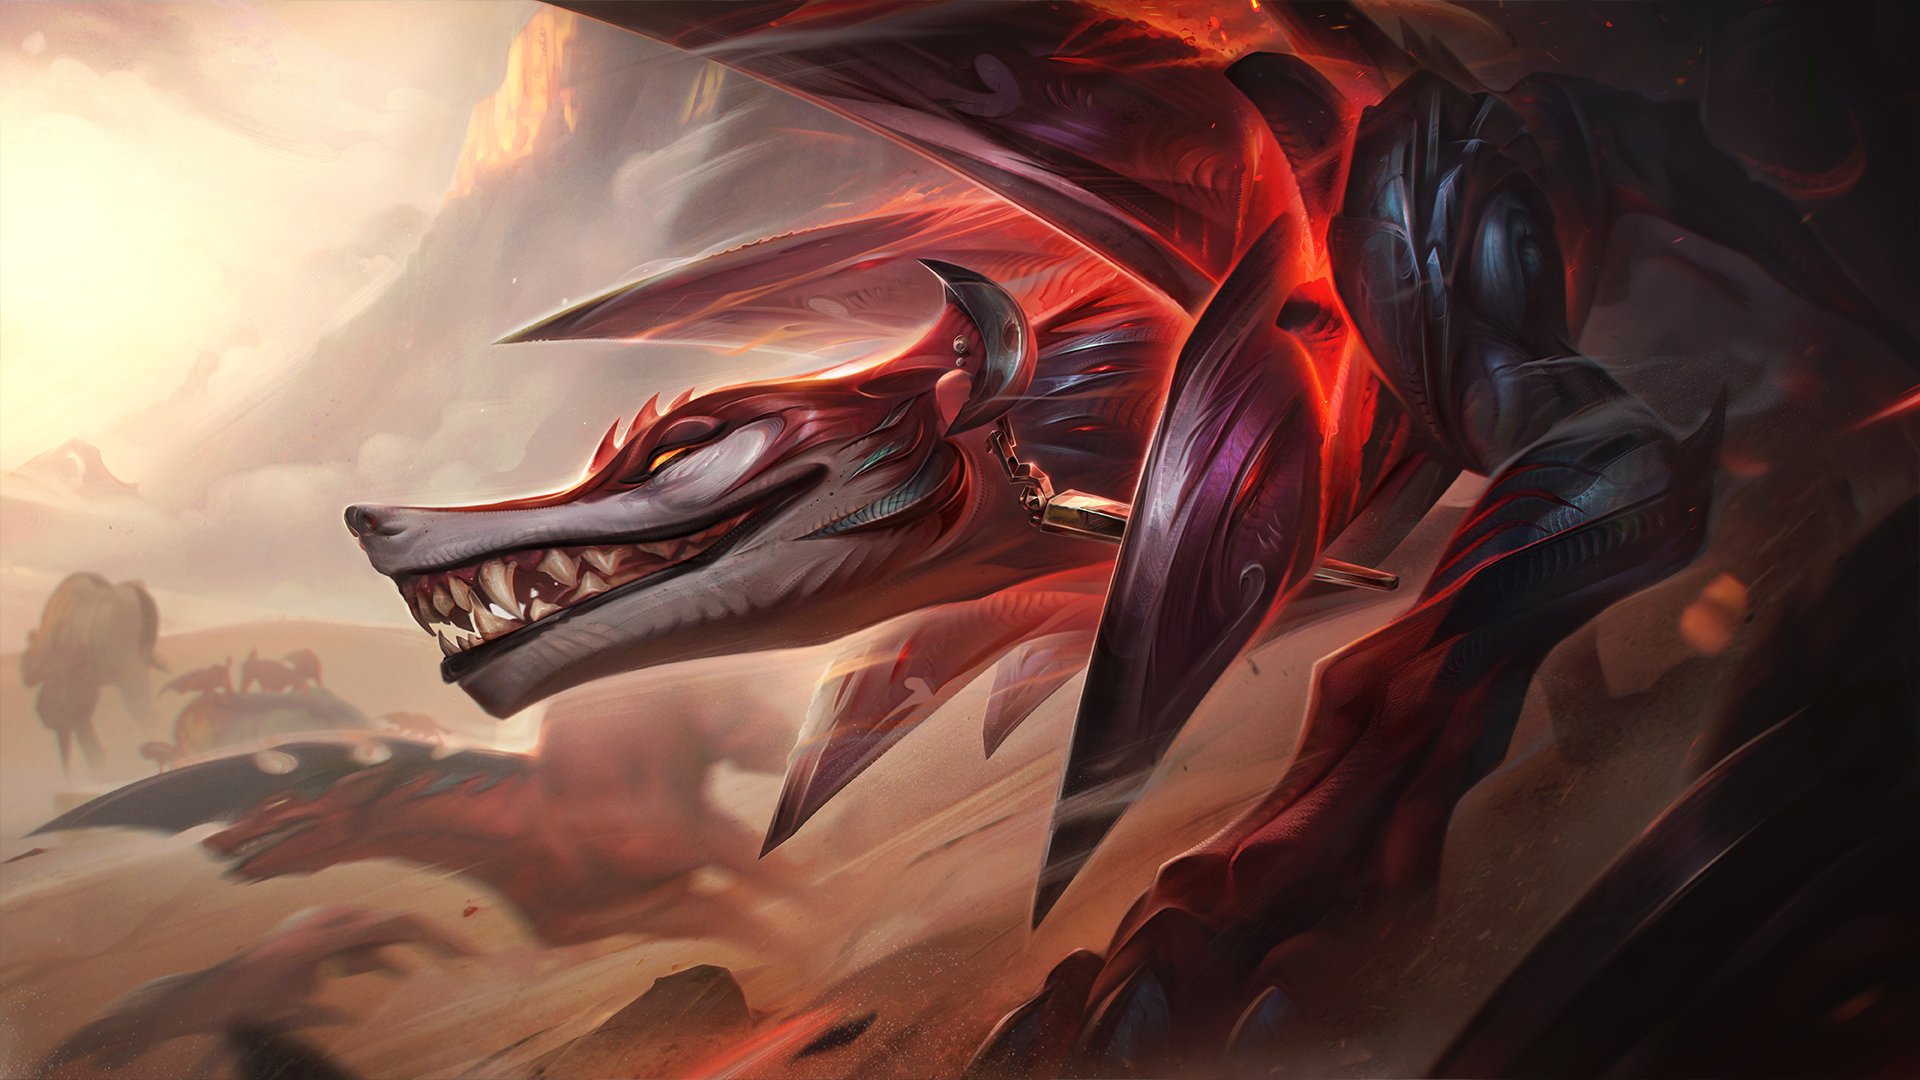 Prime Gaming on X: A new @LeagueOfLegends Mystery Skin Permanent